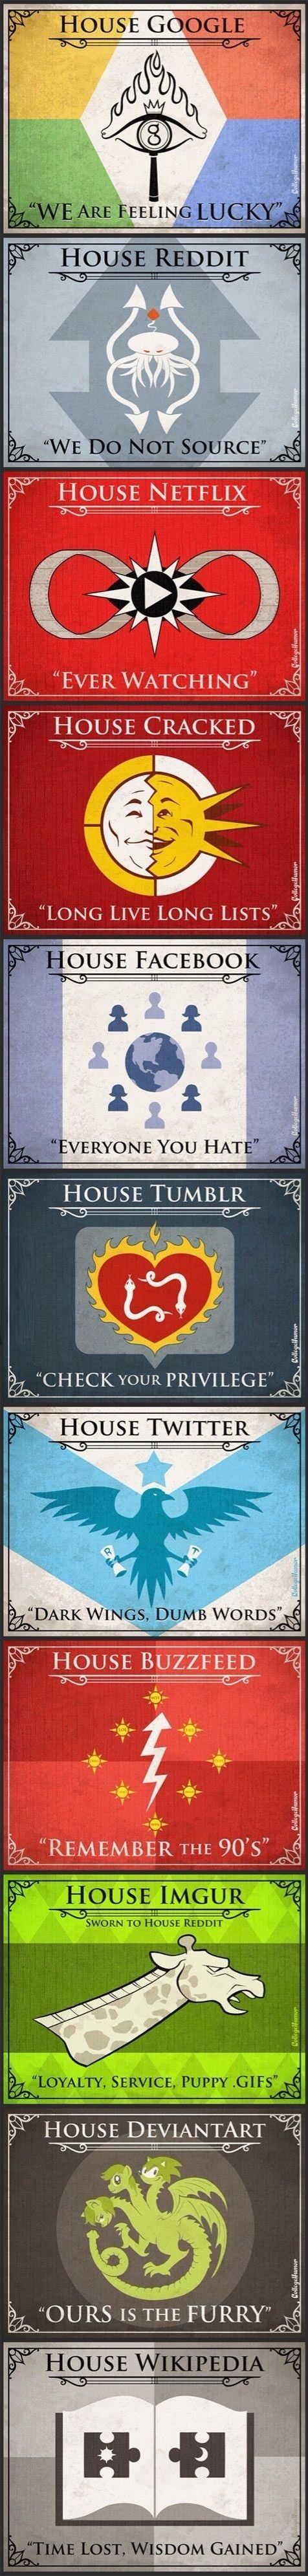 game-of-thrones-houses-sites